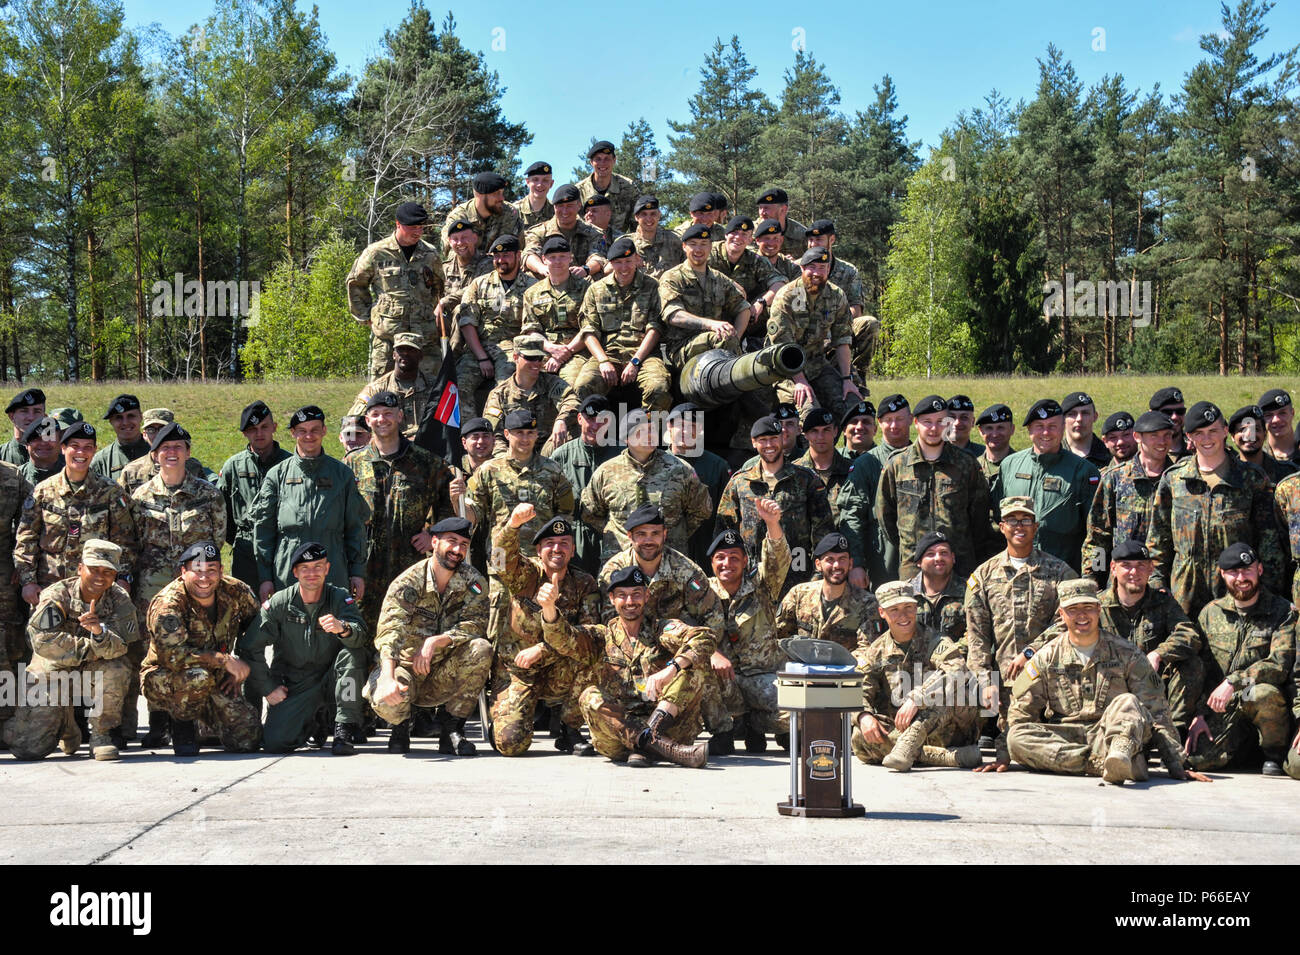 Soldiers from all nations participating in the Strong Europe Tank Challenge (SETC) pose for a group photo May 08, 2016 at Grafenwoehr Training Area, Germany. The SETC is co-hosted by U.S. Army Europe and the German Bundeswehr May 10-13, 2016. The competition is designed to foster military partnership while promoting NATO interoperability. Seven platoons from six NATO nations are competing in SETC - the first multinational tank challenge at Grafenwoehr in 25 years. For more photos, videos and stories from the Strong Europe Tank Challenge, go to http://www.eur.army.mil/tankchallenge/ (U.S. Army  Stock Photo